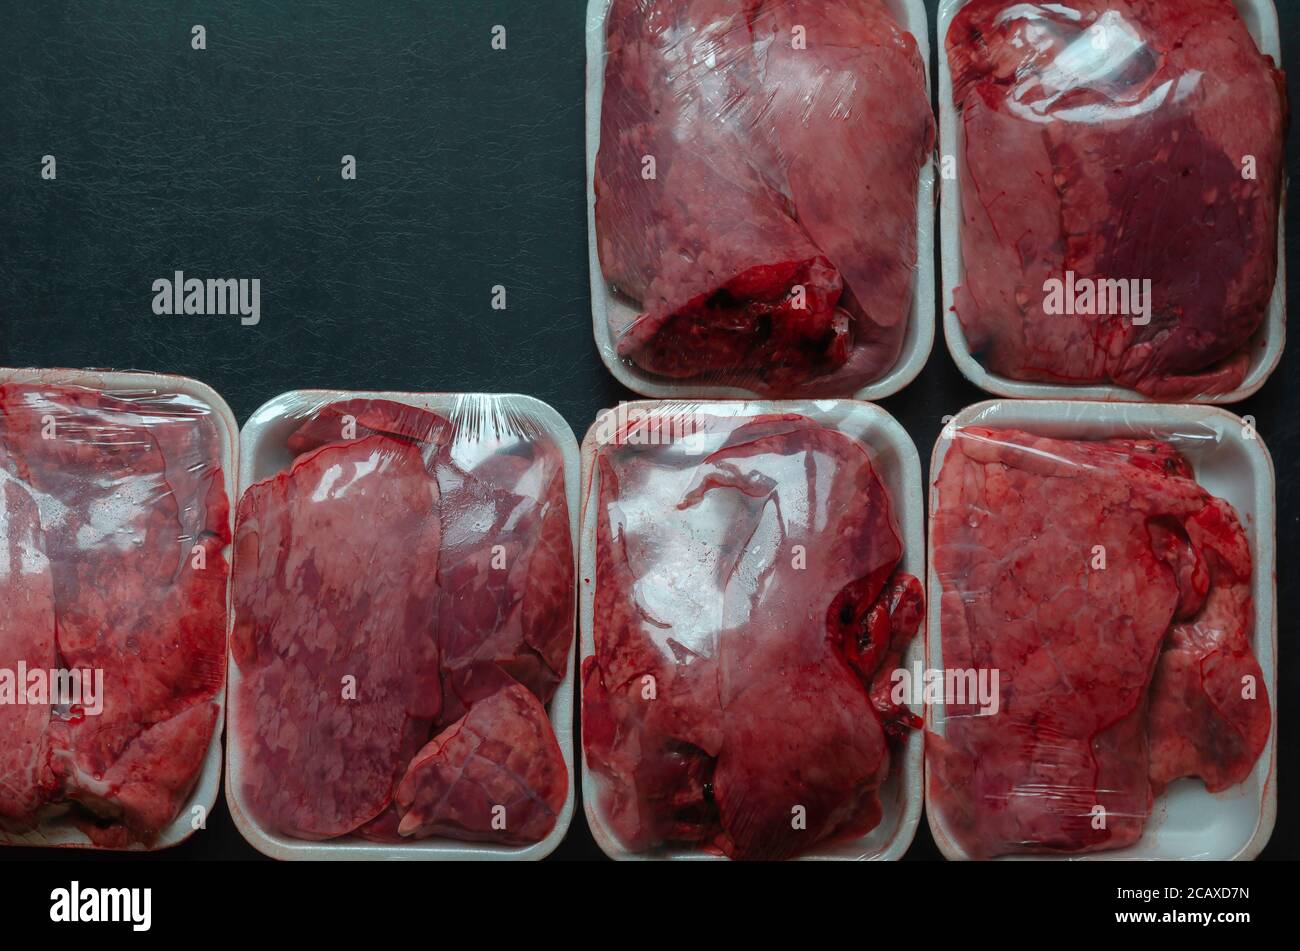 are beef lungs good for dogs